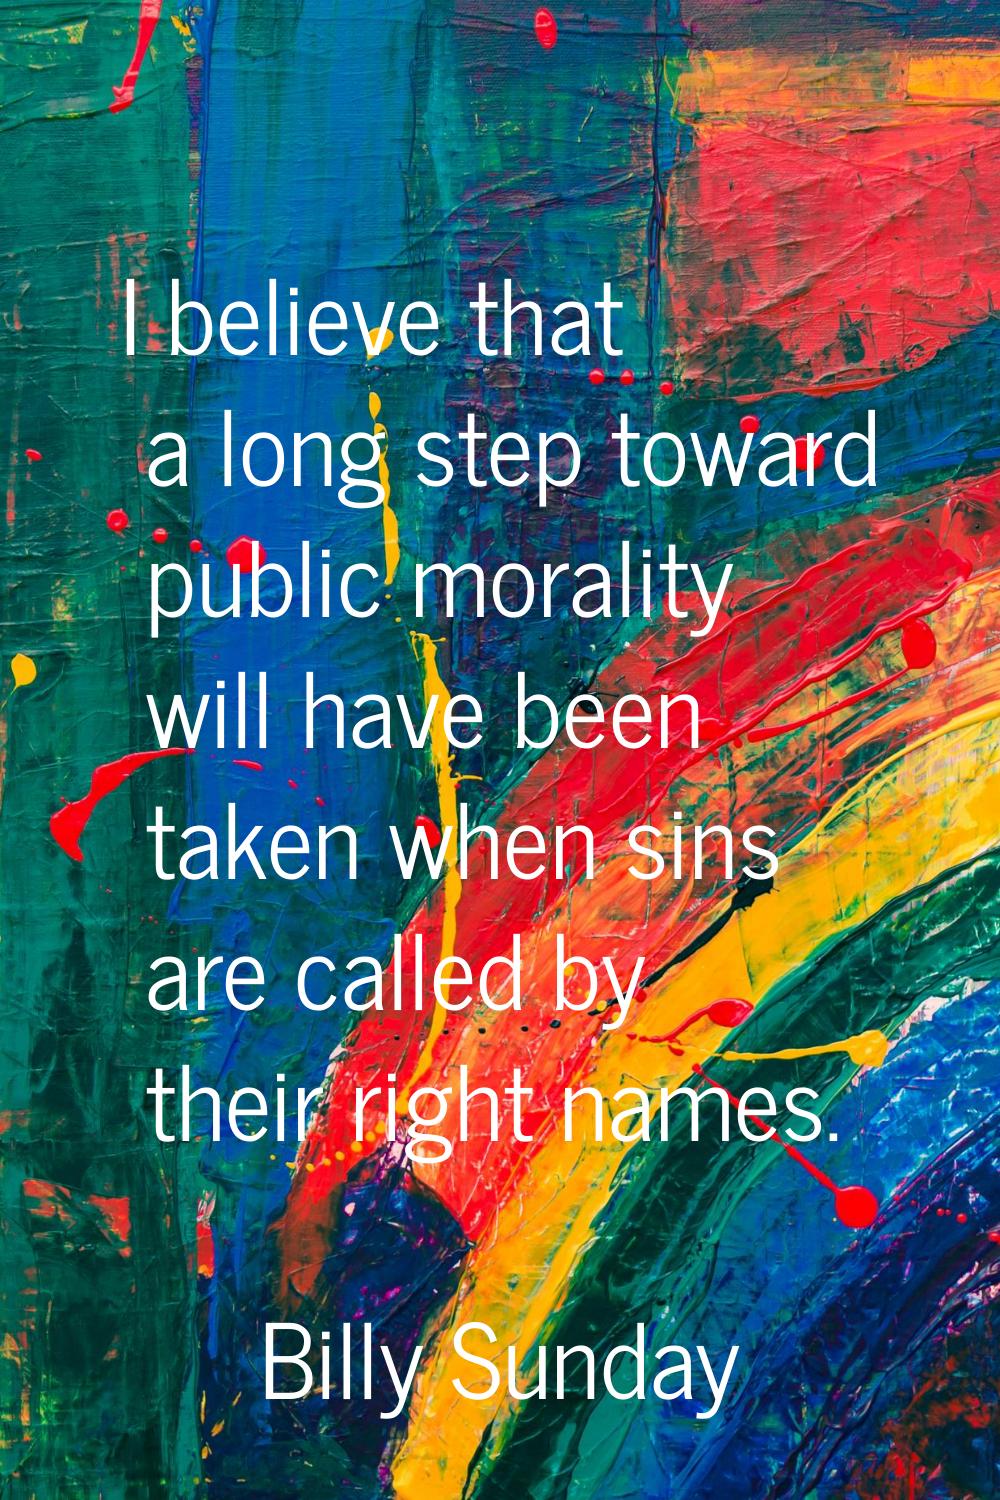 I believe that a long step toward public morality will have been taken when sins are called by thei